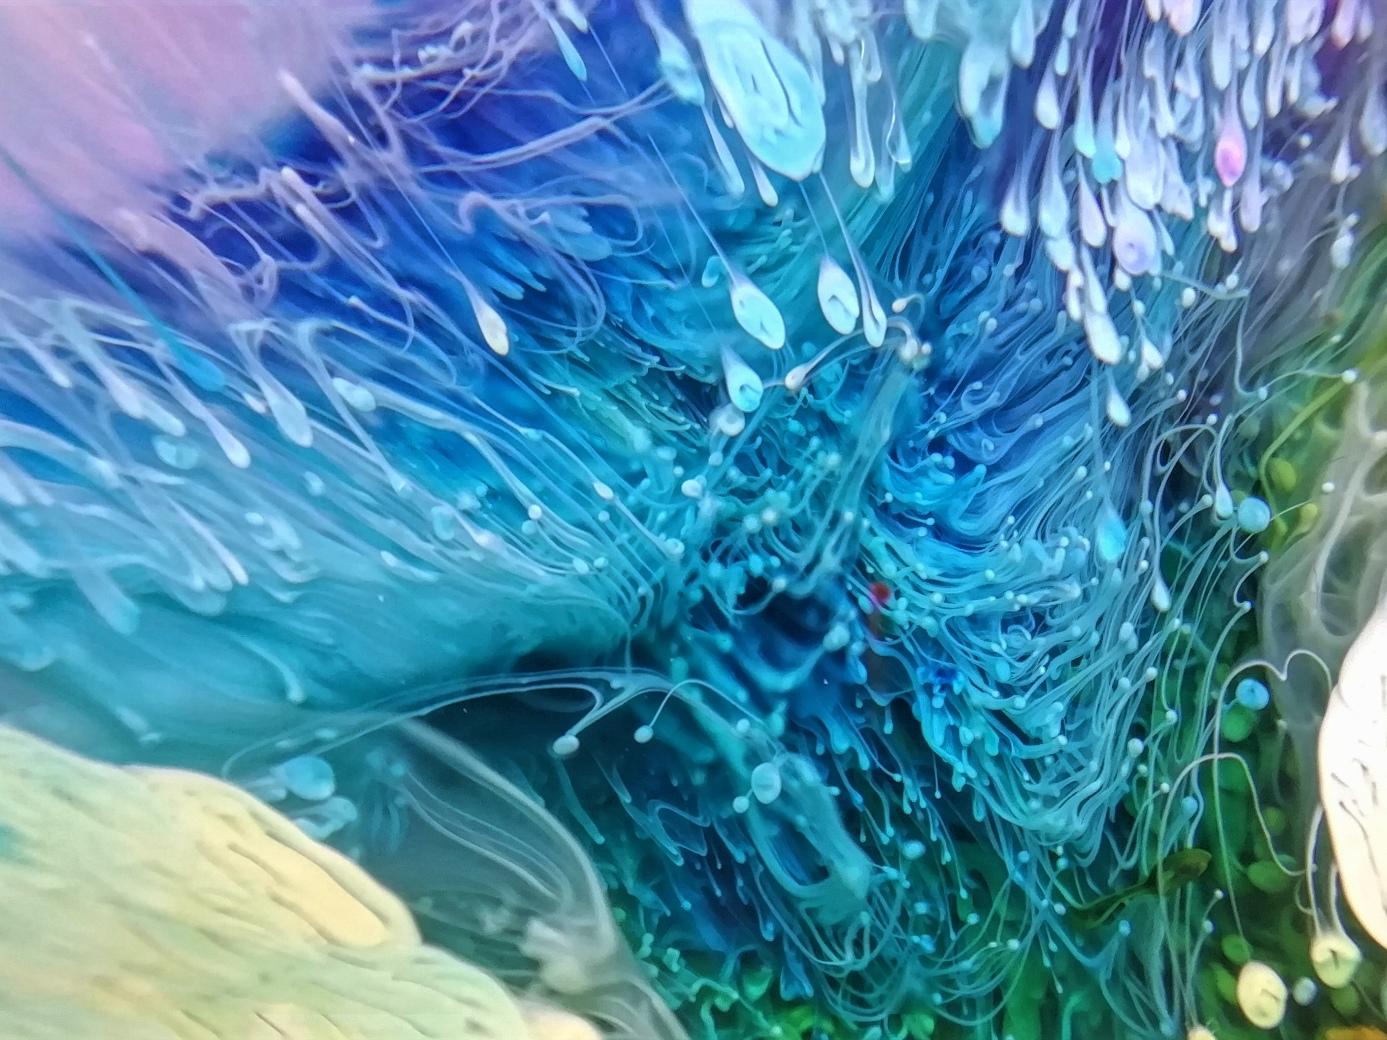 alcohol ink in resin [OC] 1387 x 1040: wallpaper